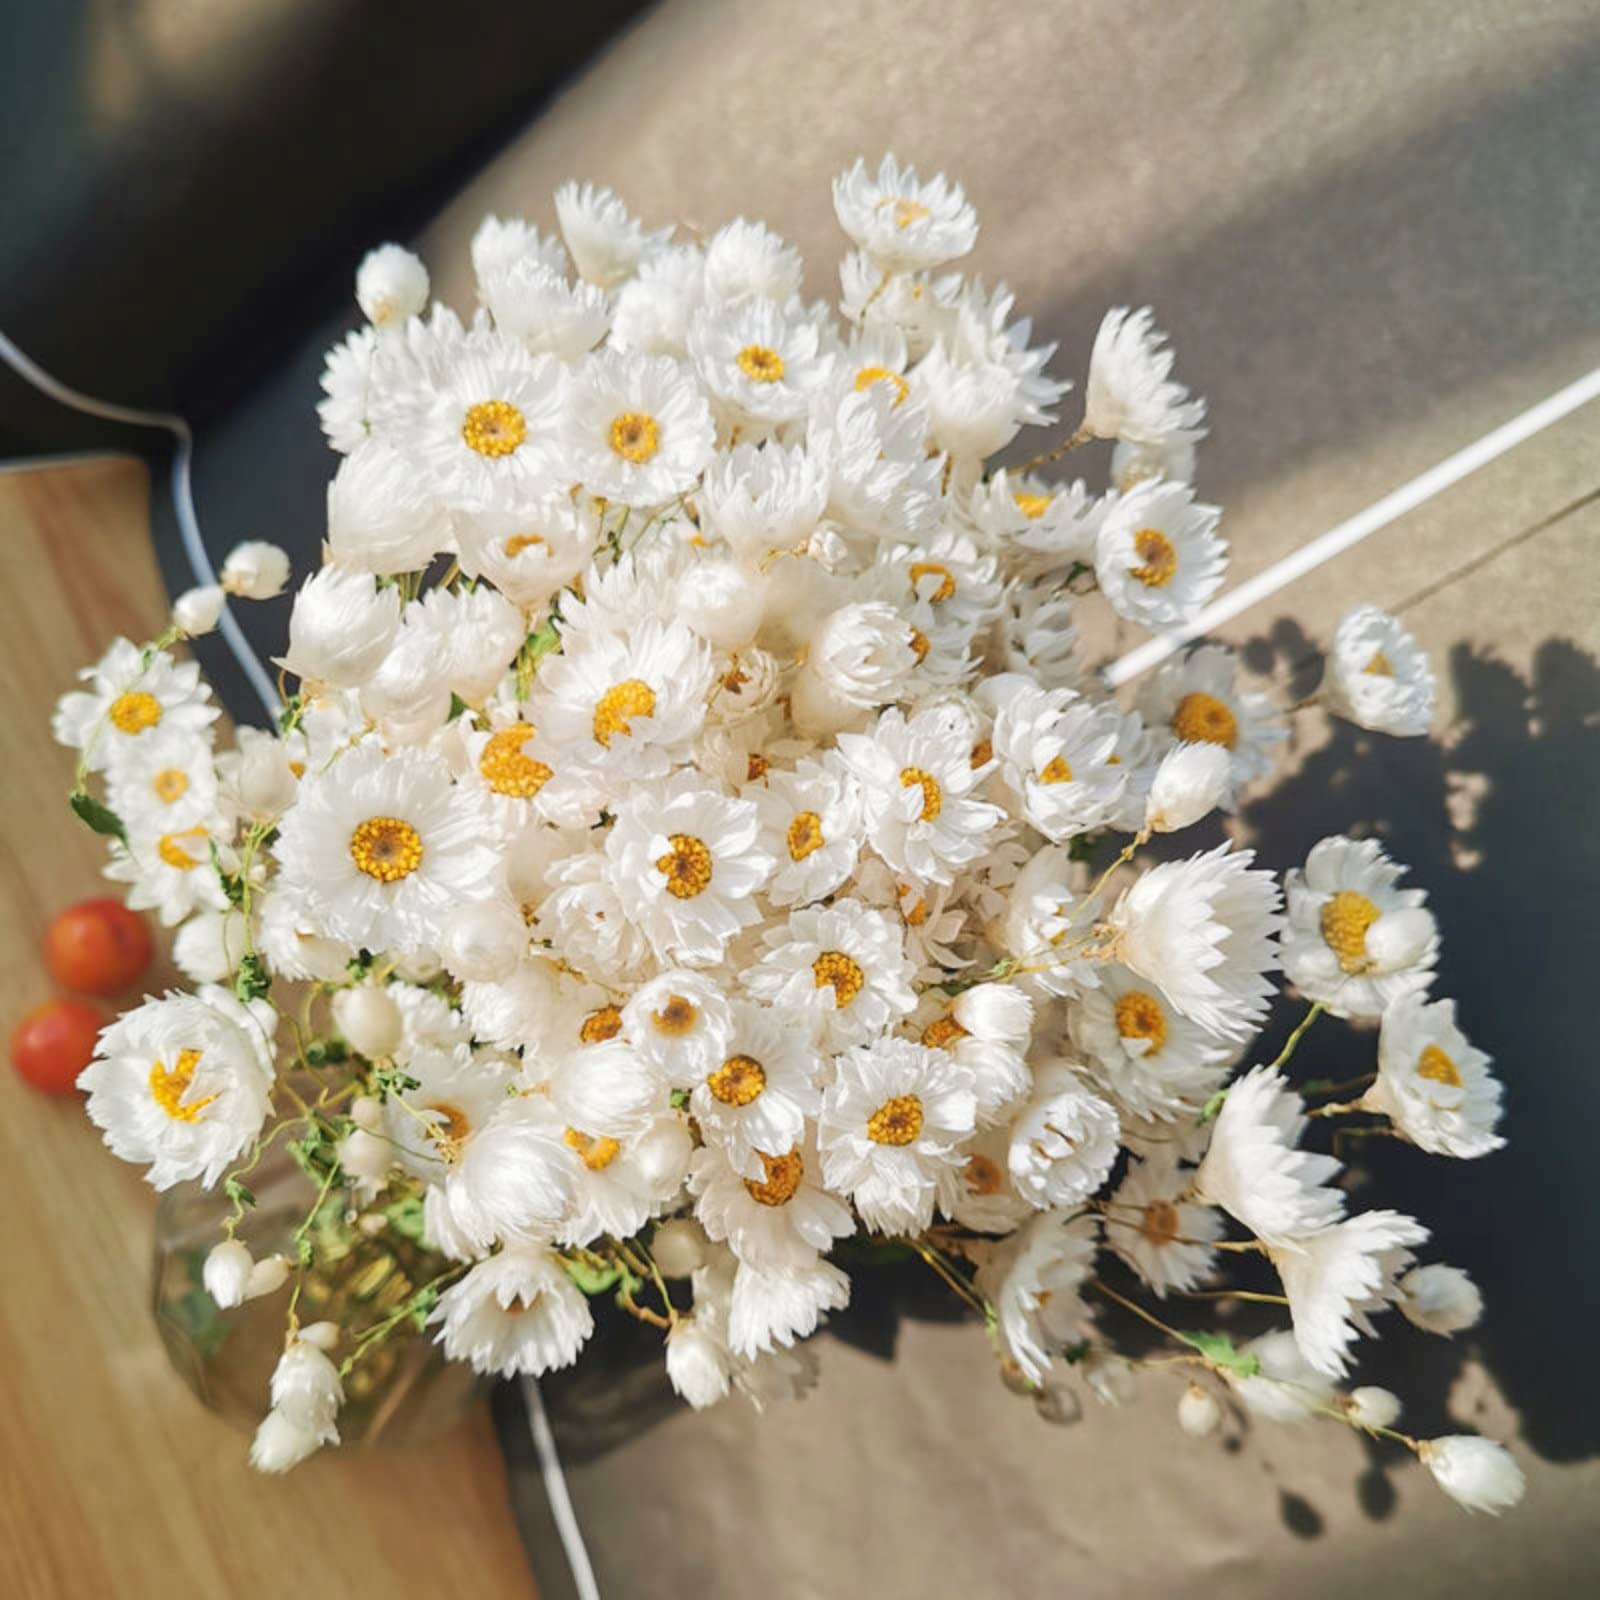 Dried Daisy Flowers Bouquet,Real Dry White Flower,Gerber Daisies Arrangements for Wedding,Farmhouse Decorations,DIY Home Decor